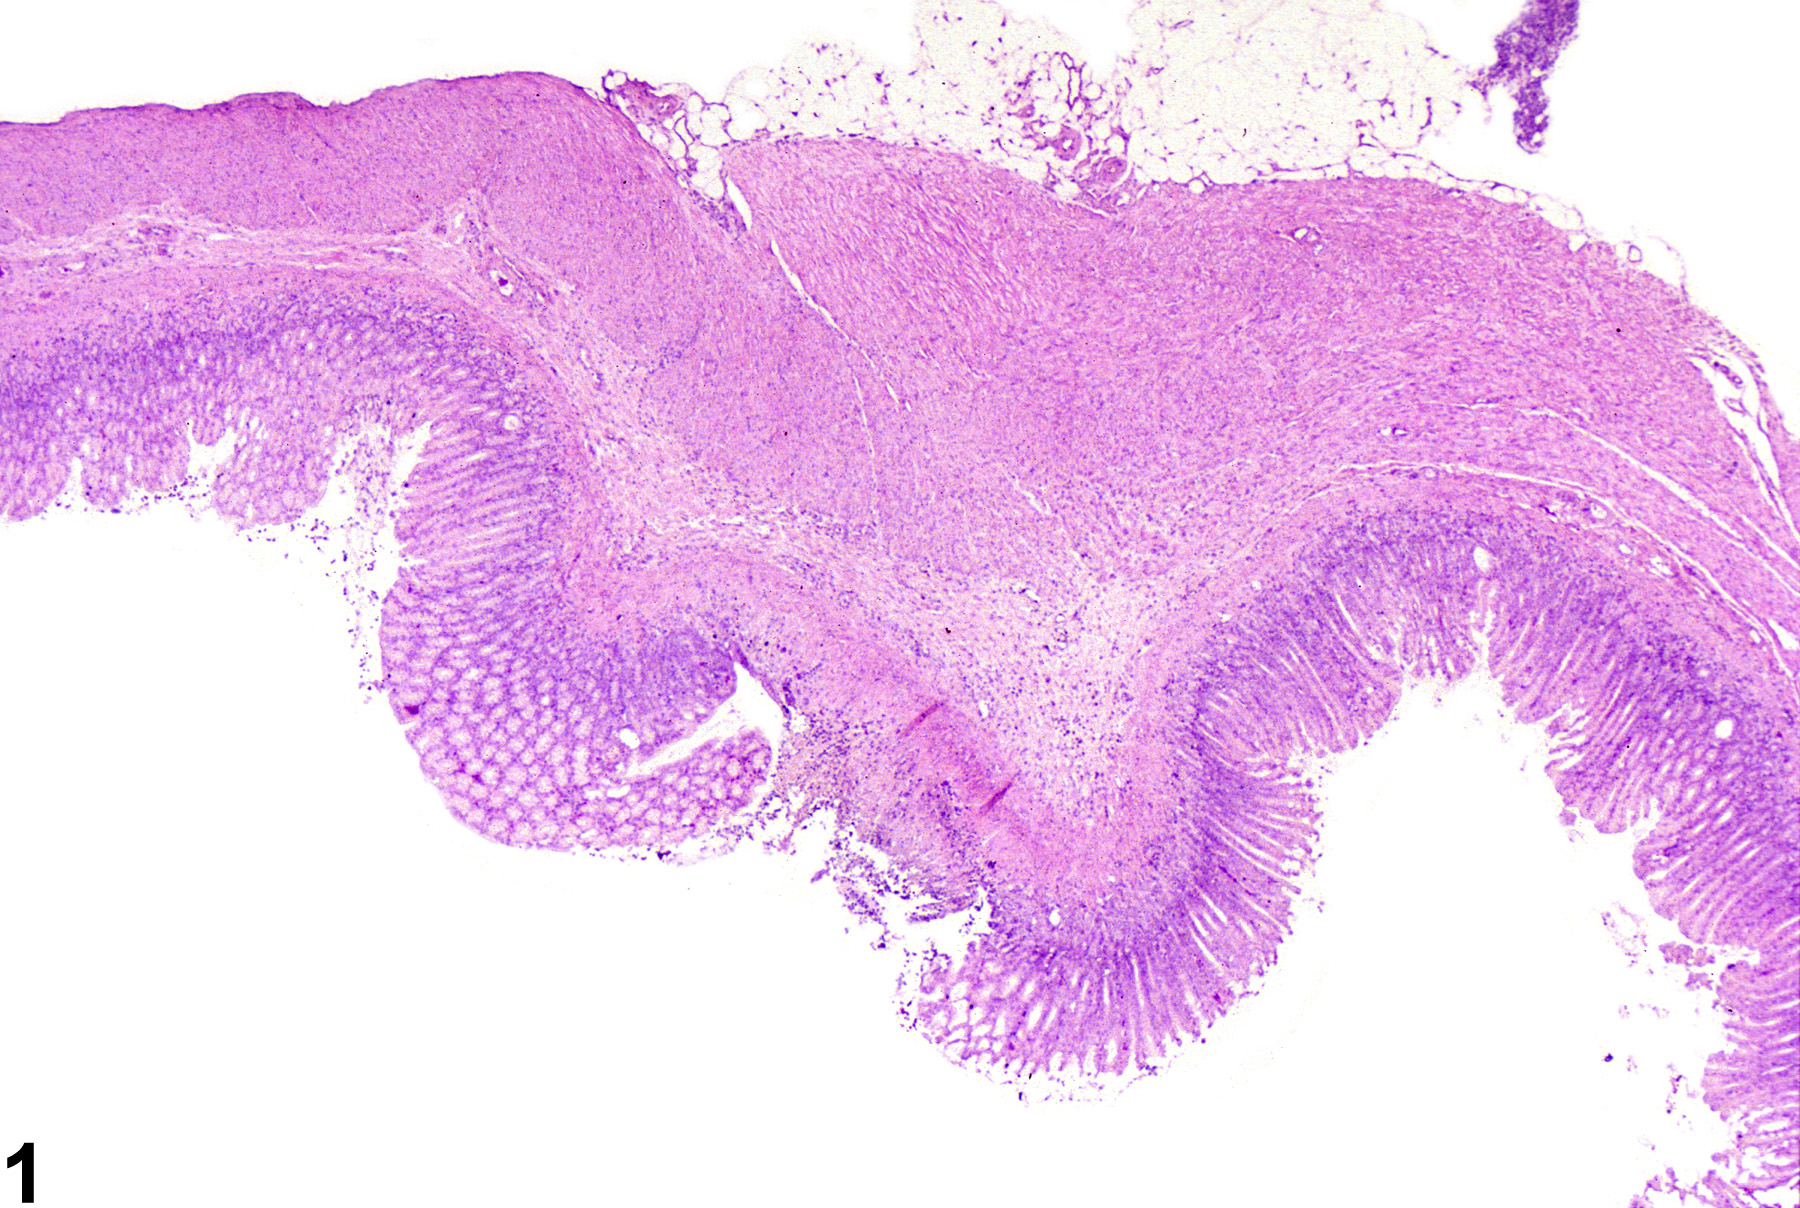 Image of ulcer in the glandular stomach from a male F344/N rat in a chronic study